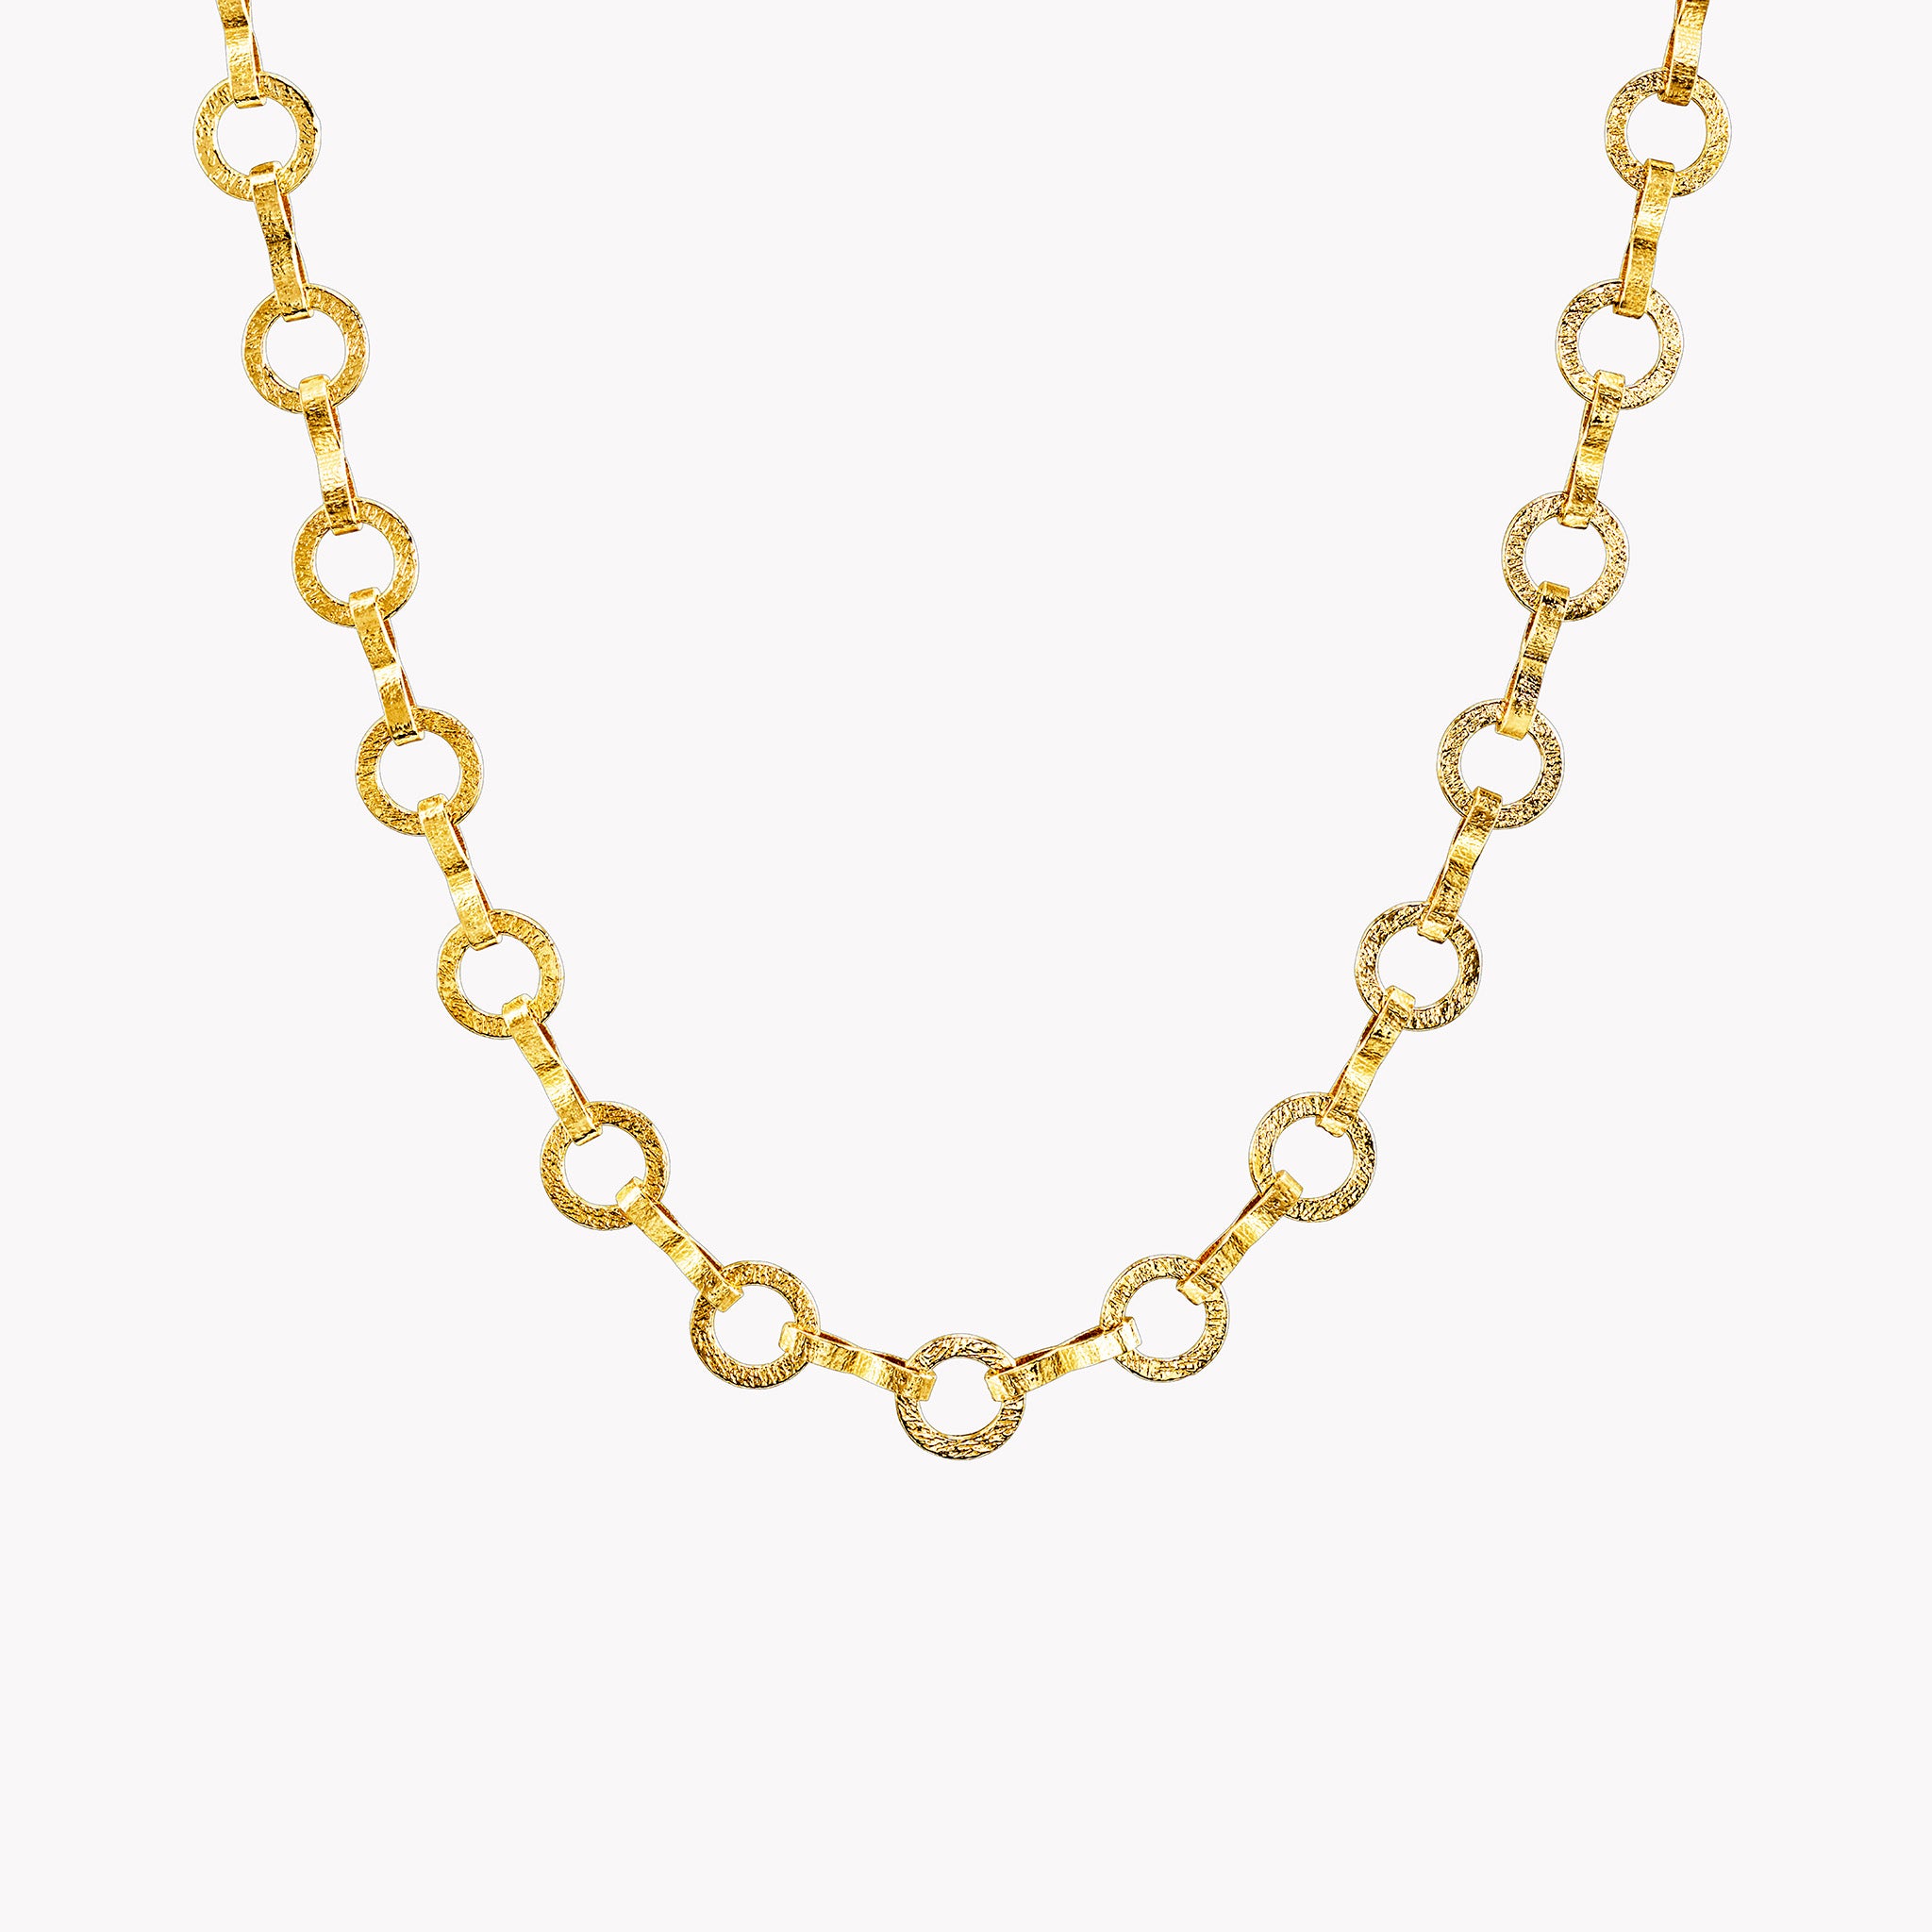 Heavy Large Circle Textured Chain